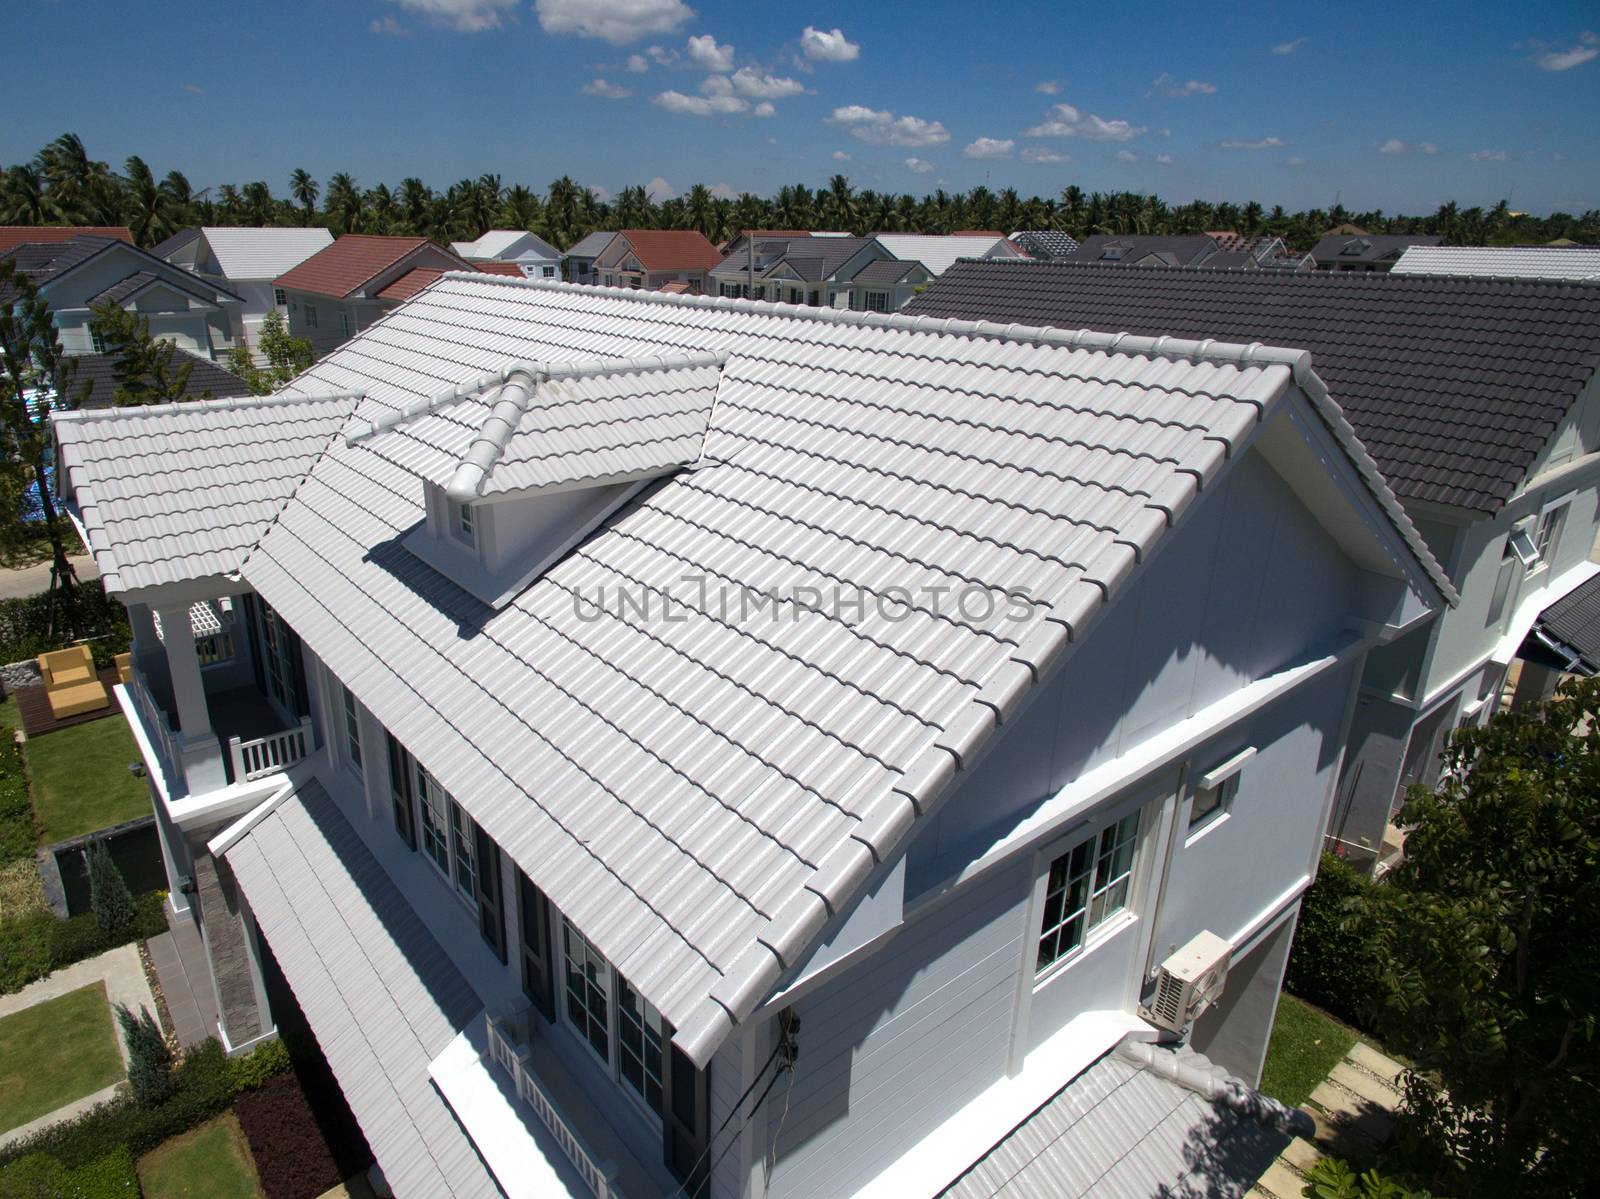 House New Roof Tiles by praethip